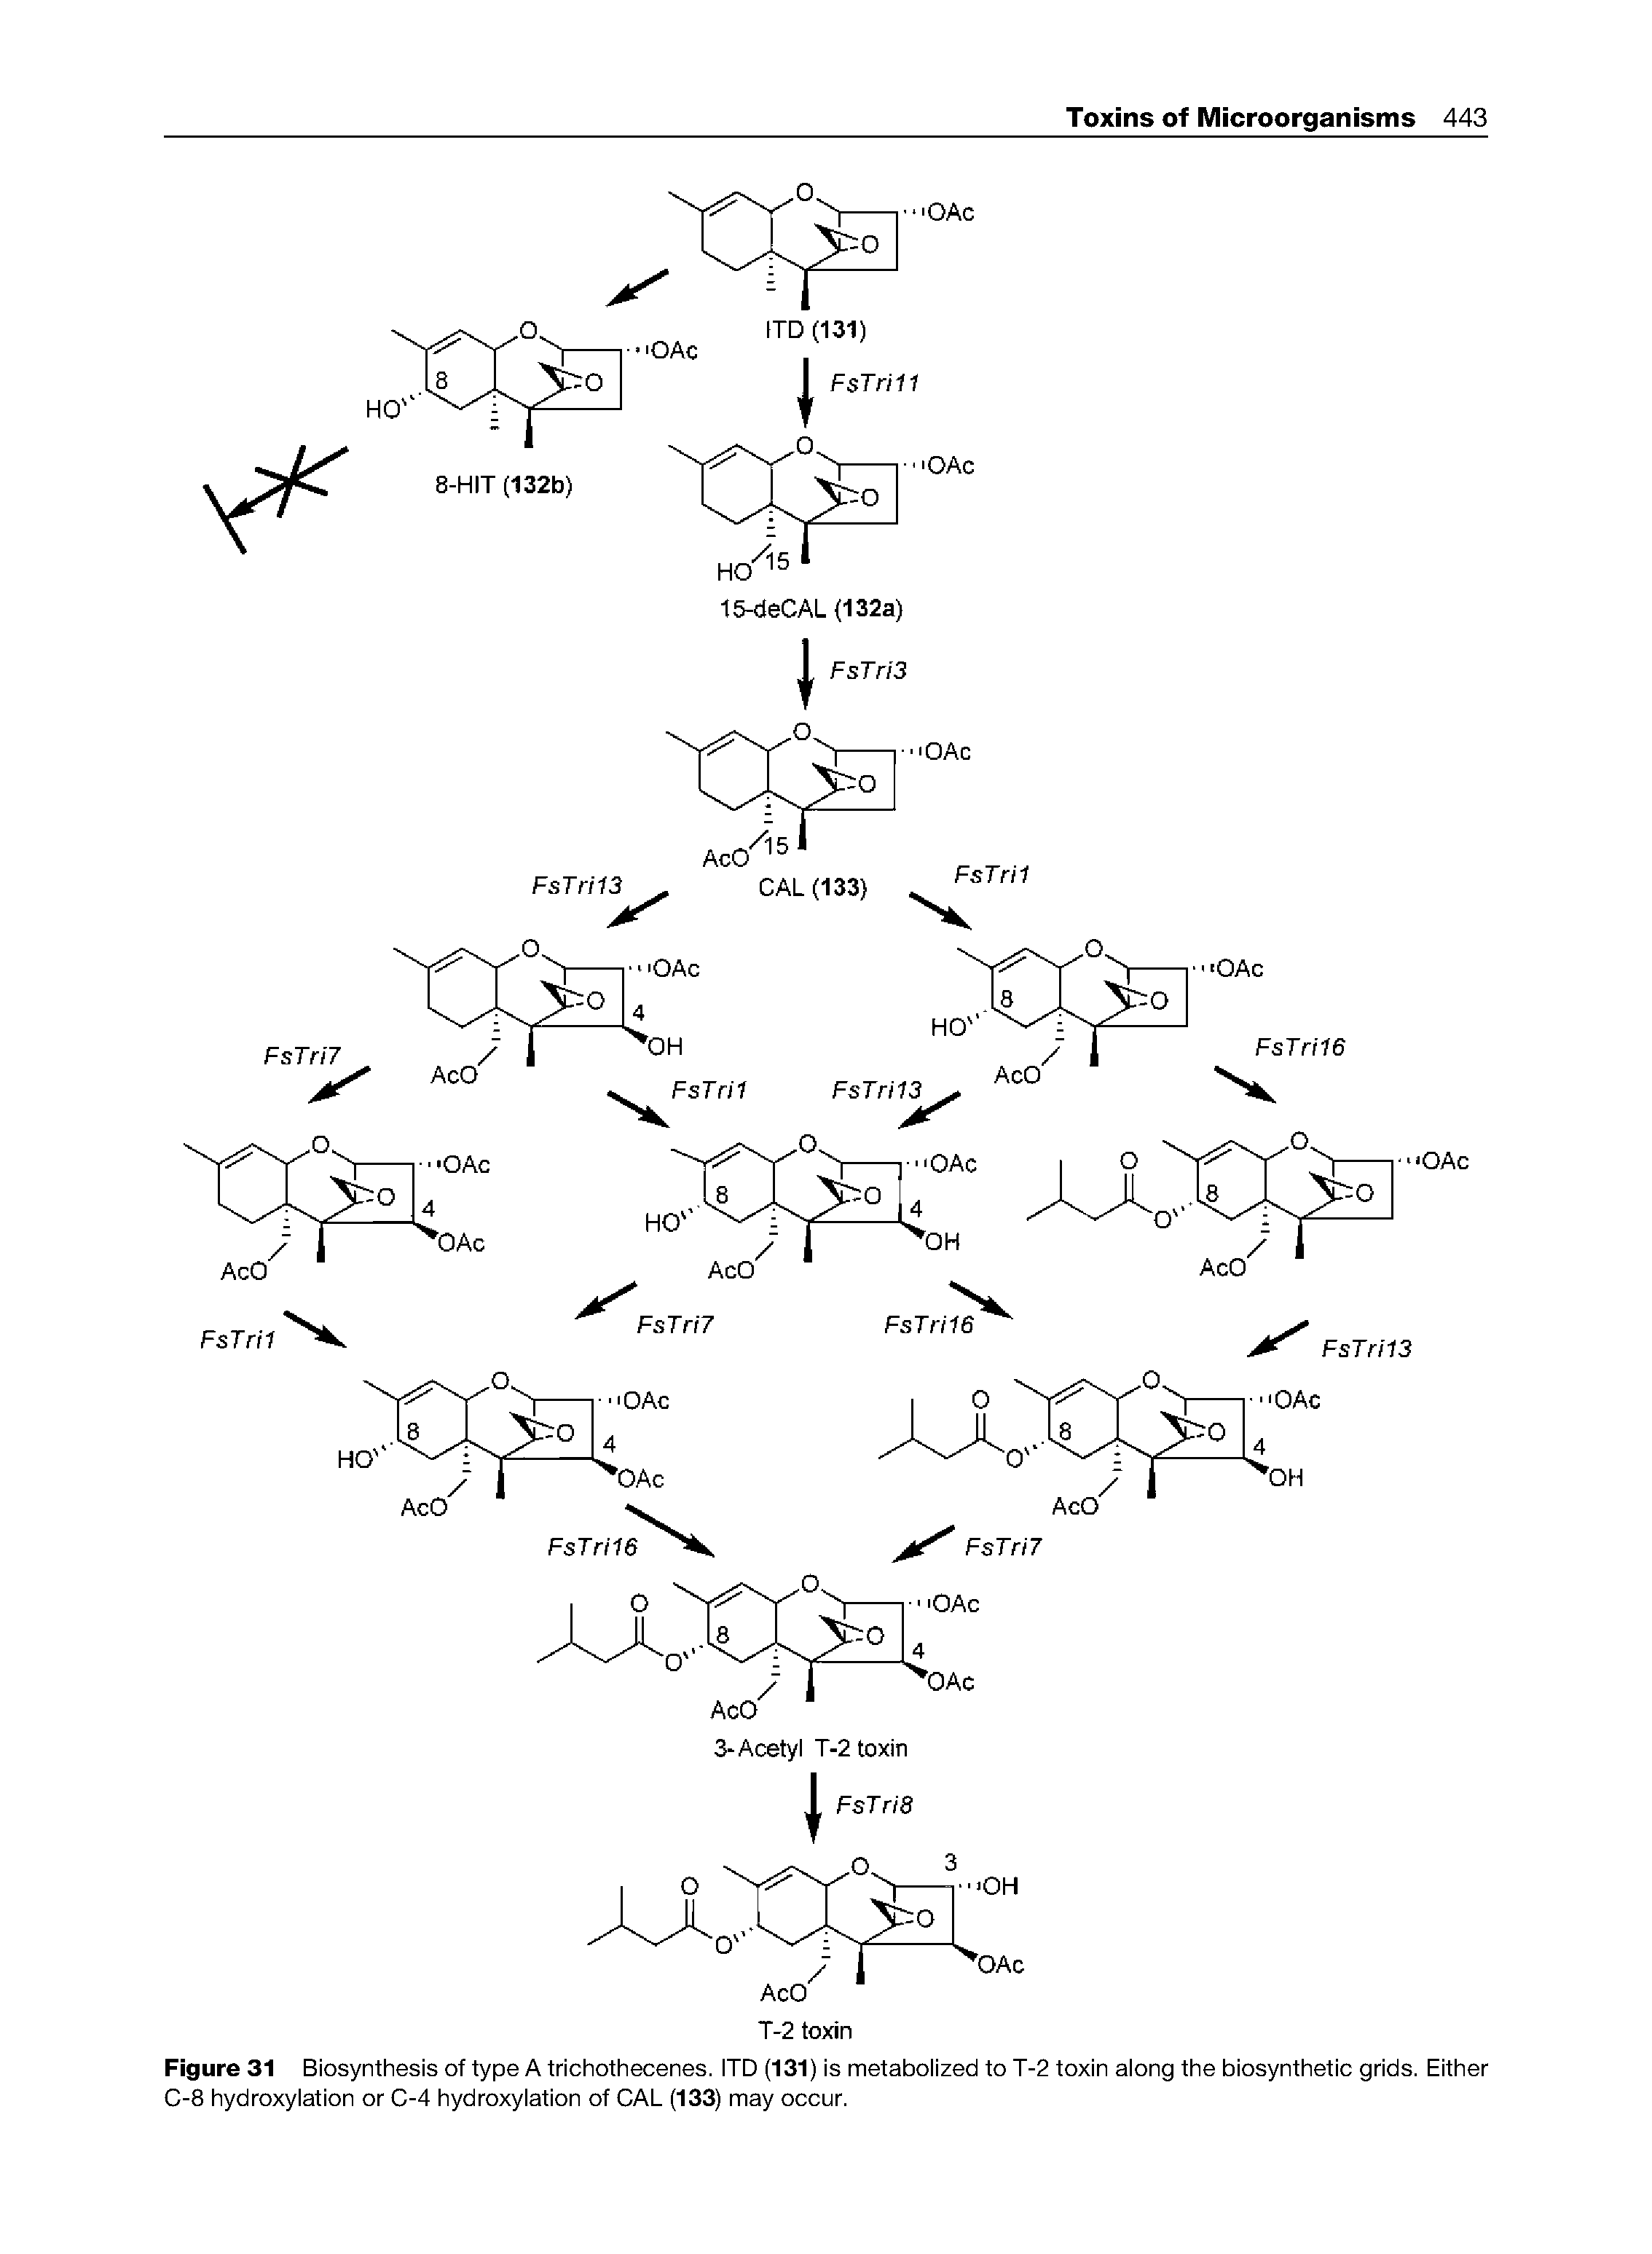 Figure 31 Biosynthesis of type A trichothecenes. ITD (131) is metabolized to T-2 toxin along the biosynthetic grids. Either C-8 hydroxylation or C-4 hydroxylation of CAL (133) may occur.